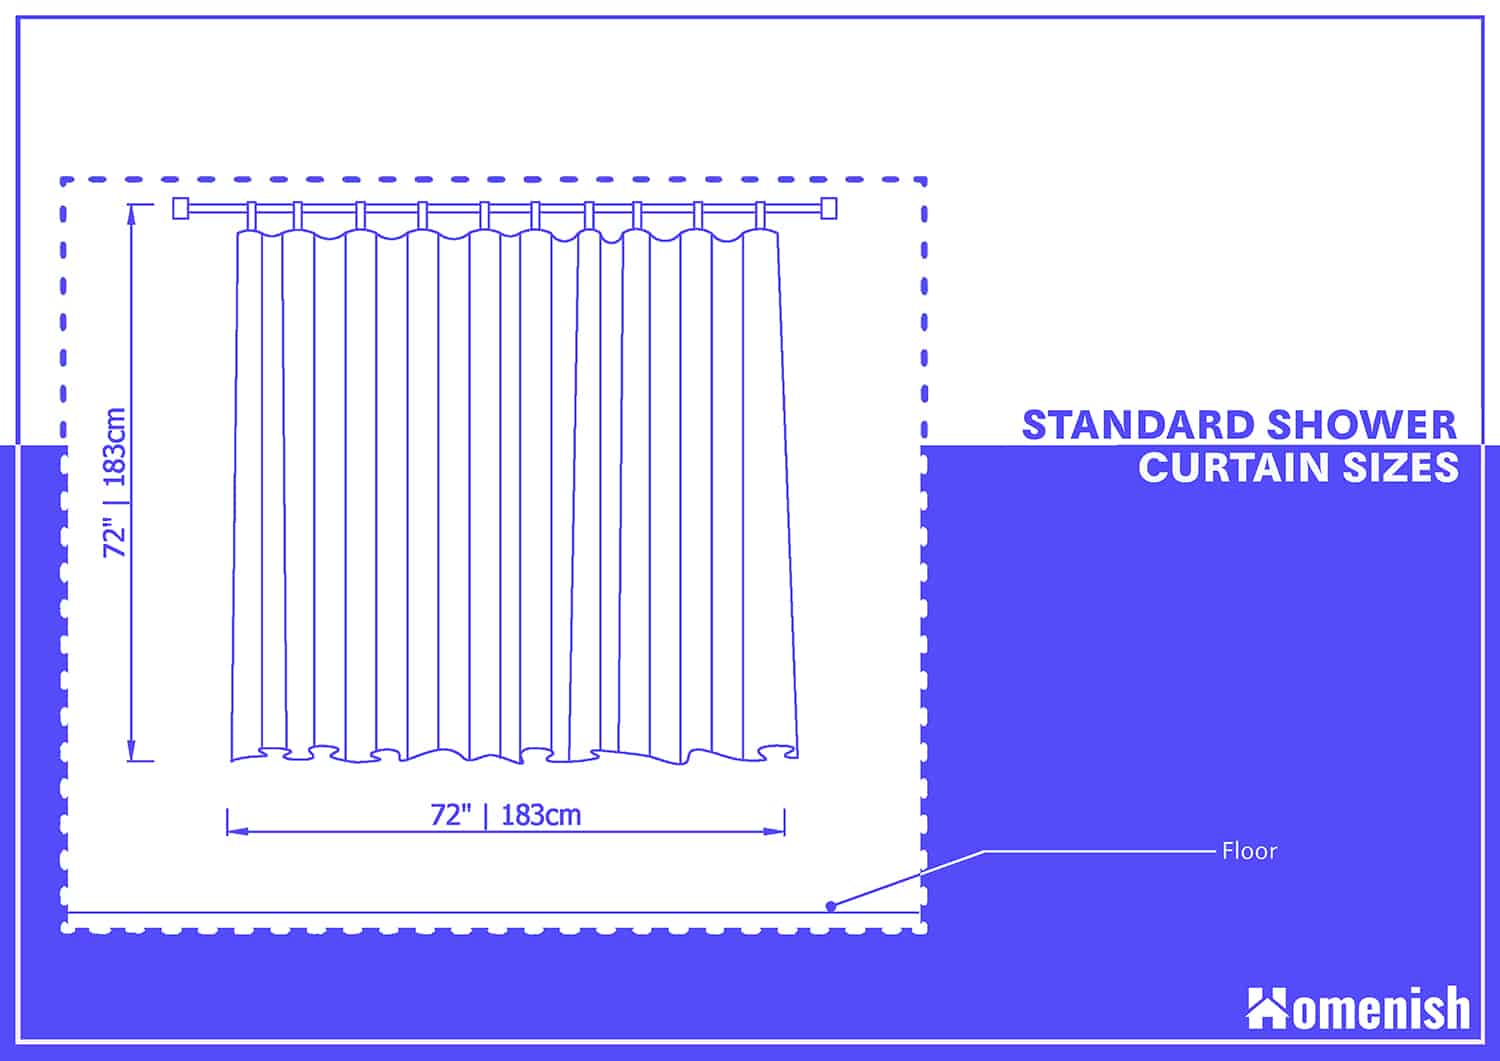 Standard Shower Curtain Size, What Is The Average Size Of Shower Curtain